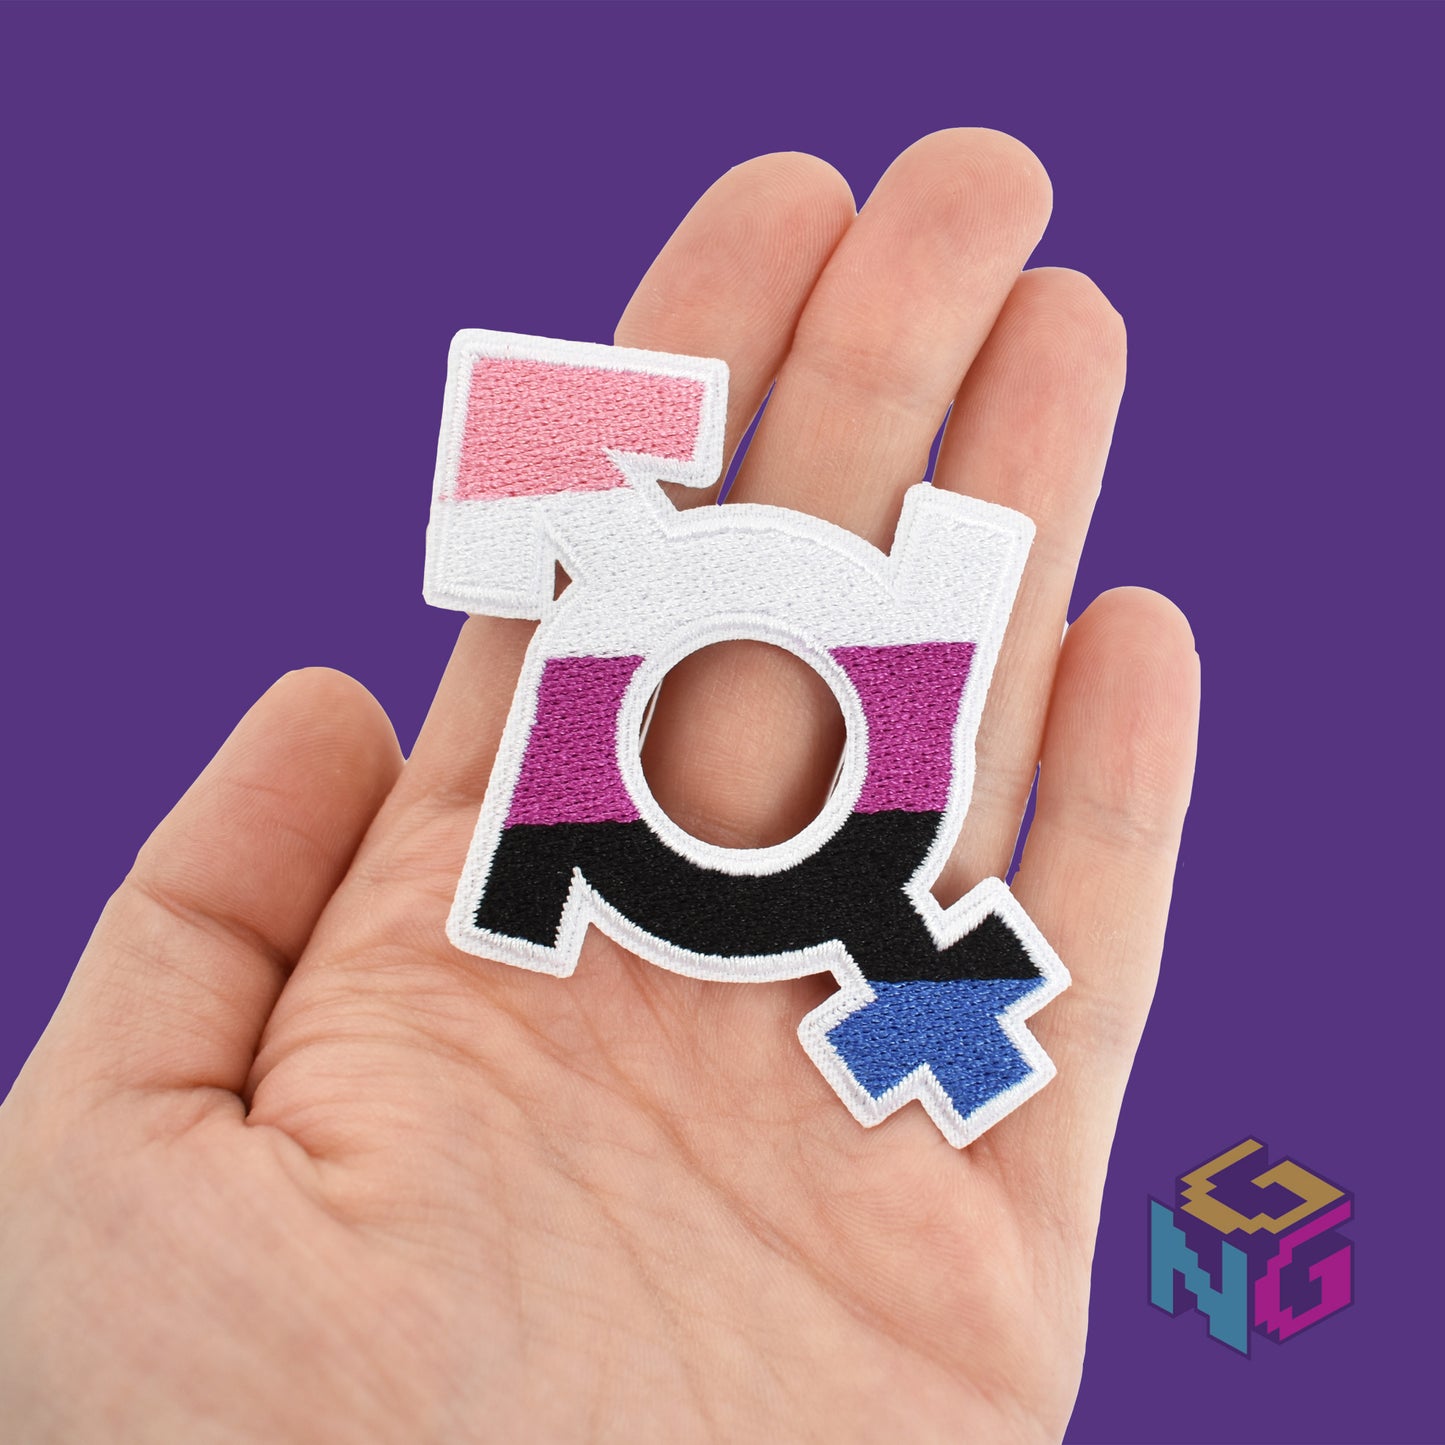 genderfluid iron on patch held in hand in front of purple background